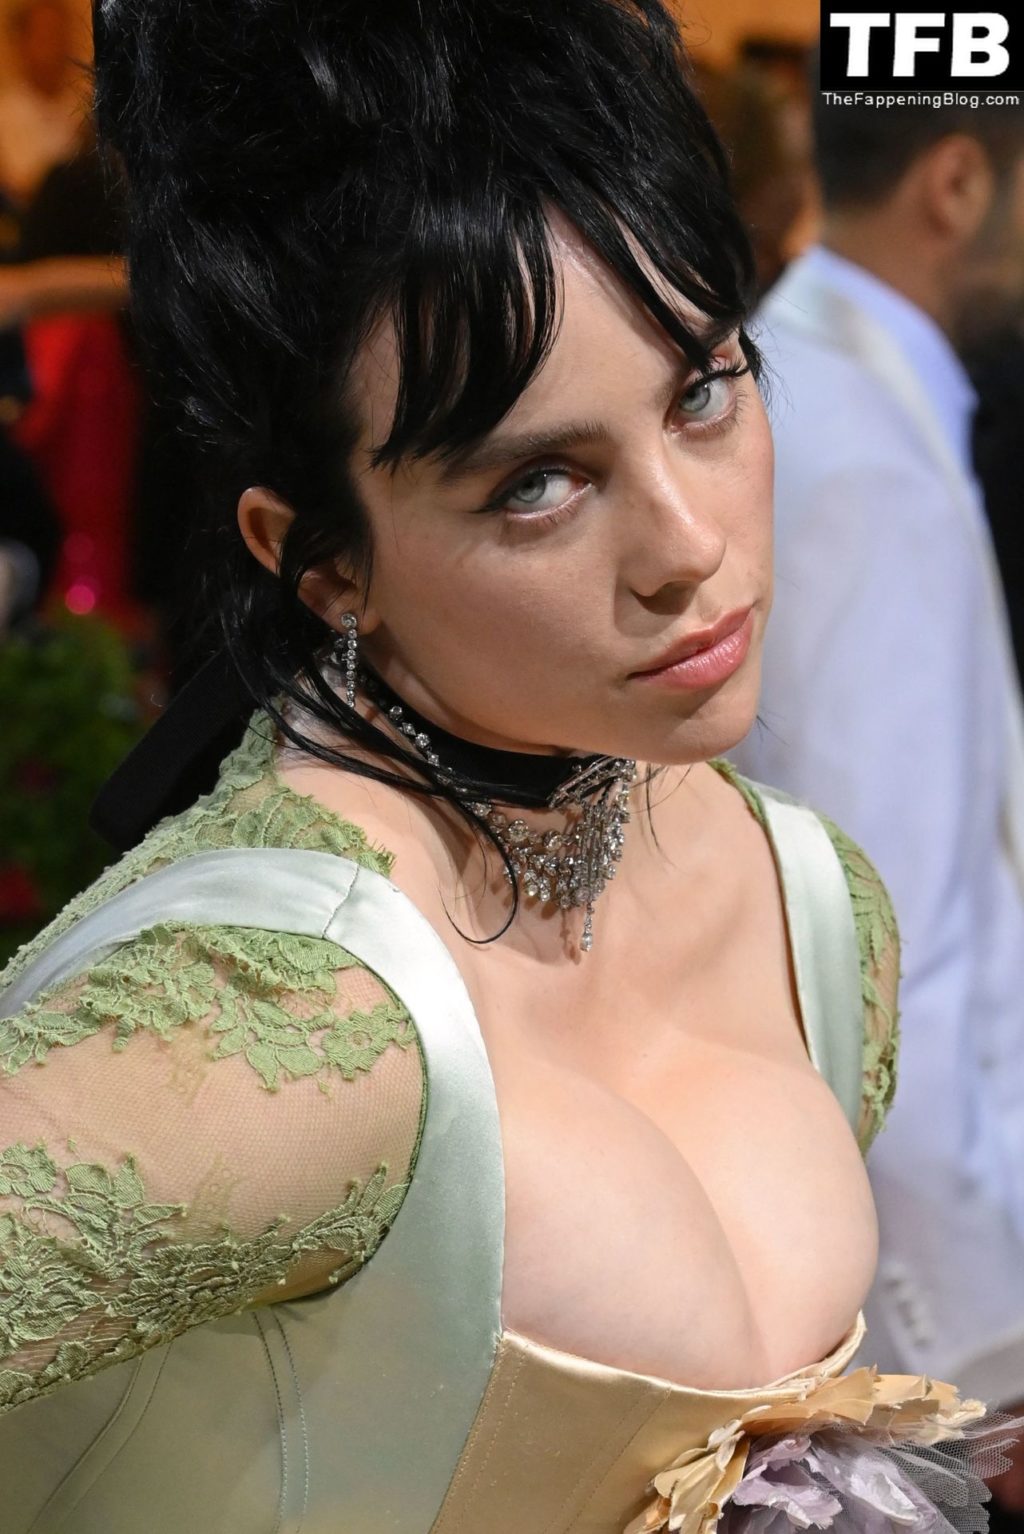 Billie Eilish Sexy The Fappening Blog 124 1024x1534 - Billie Eilish Showcases Nice Cleavage at The 2022 Met Gala in NYC (155 Photos)